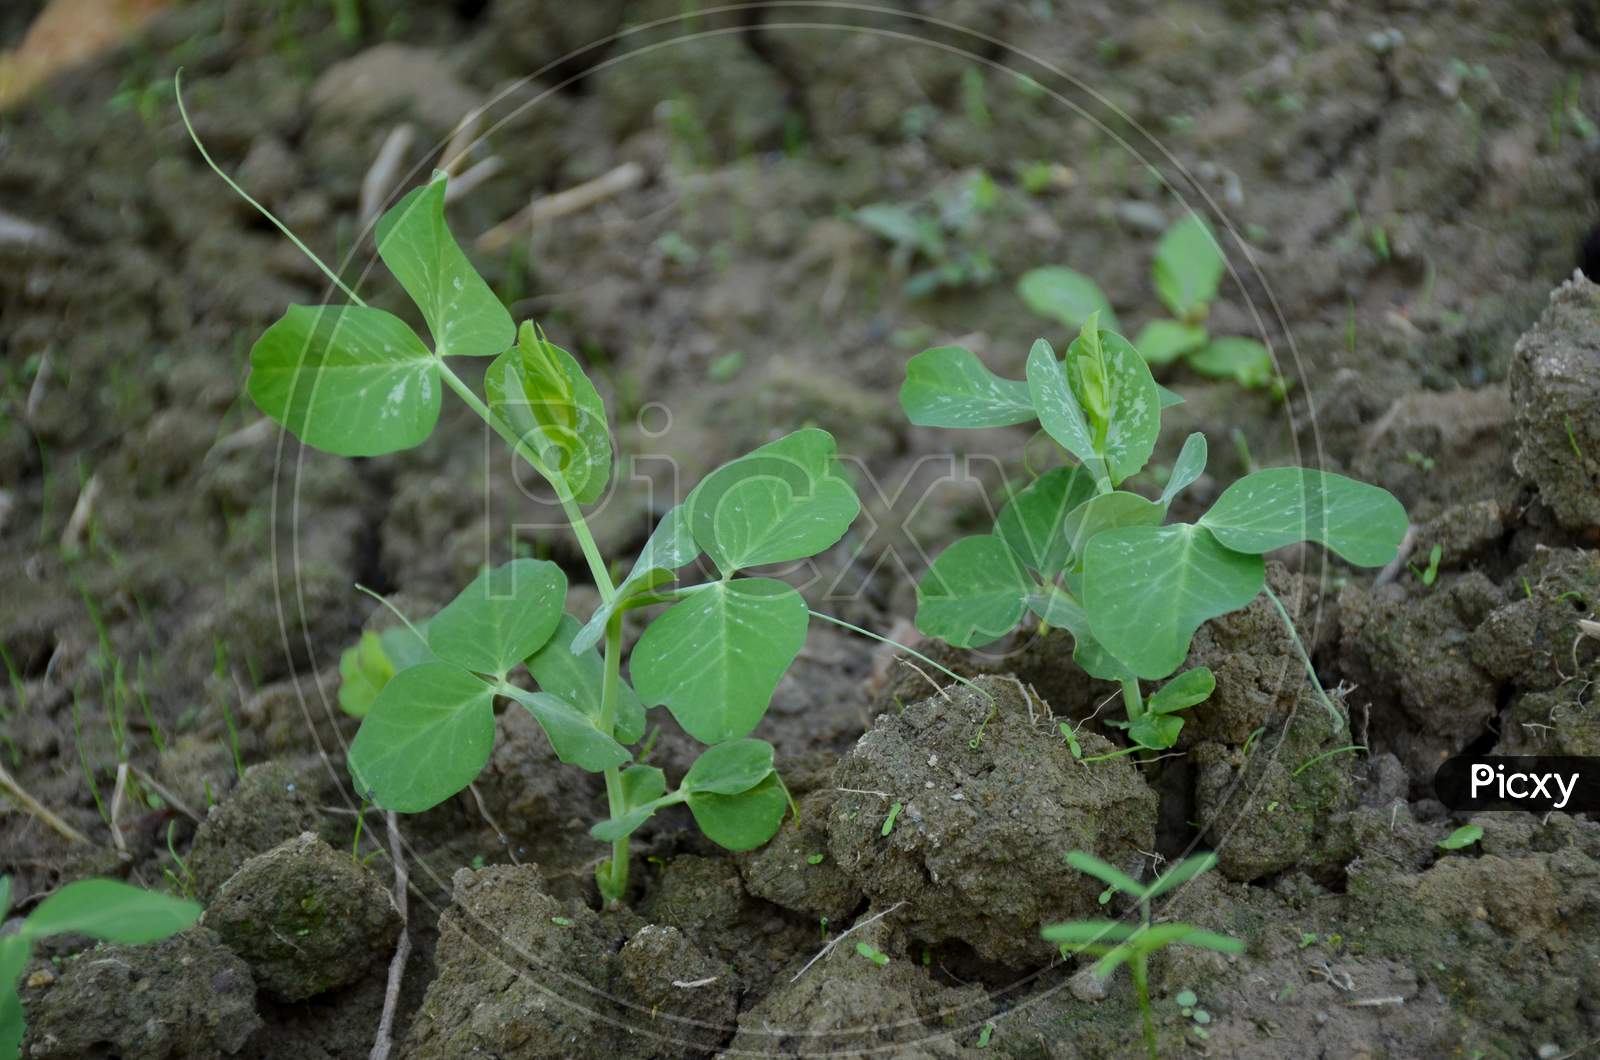 The Small Ripe Green Peas Plant Seedlings In The Garden.